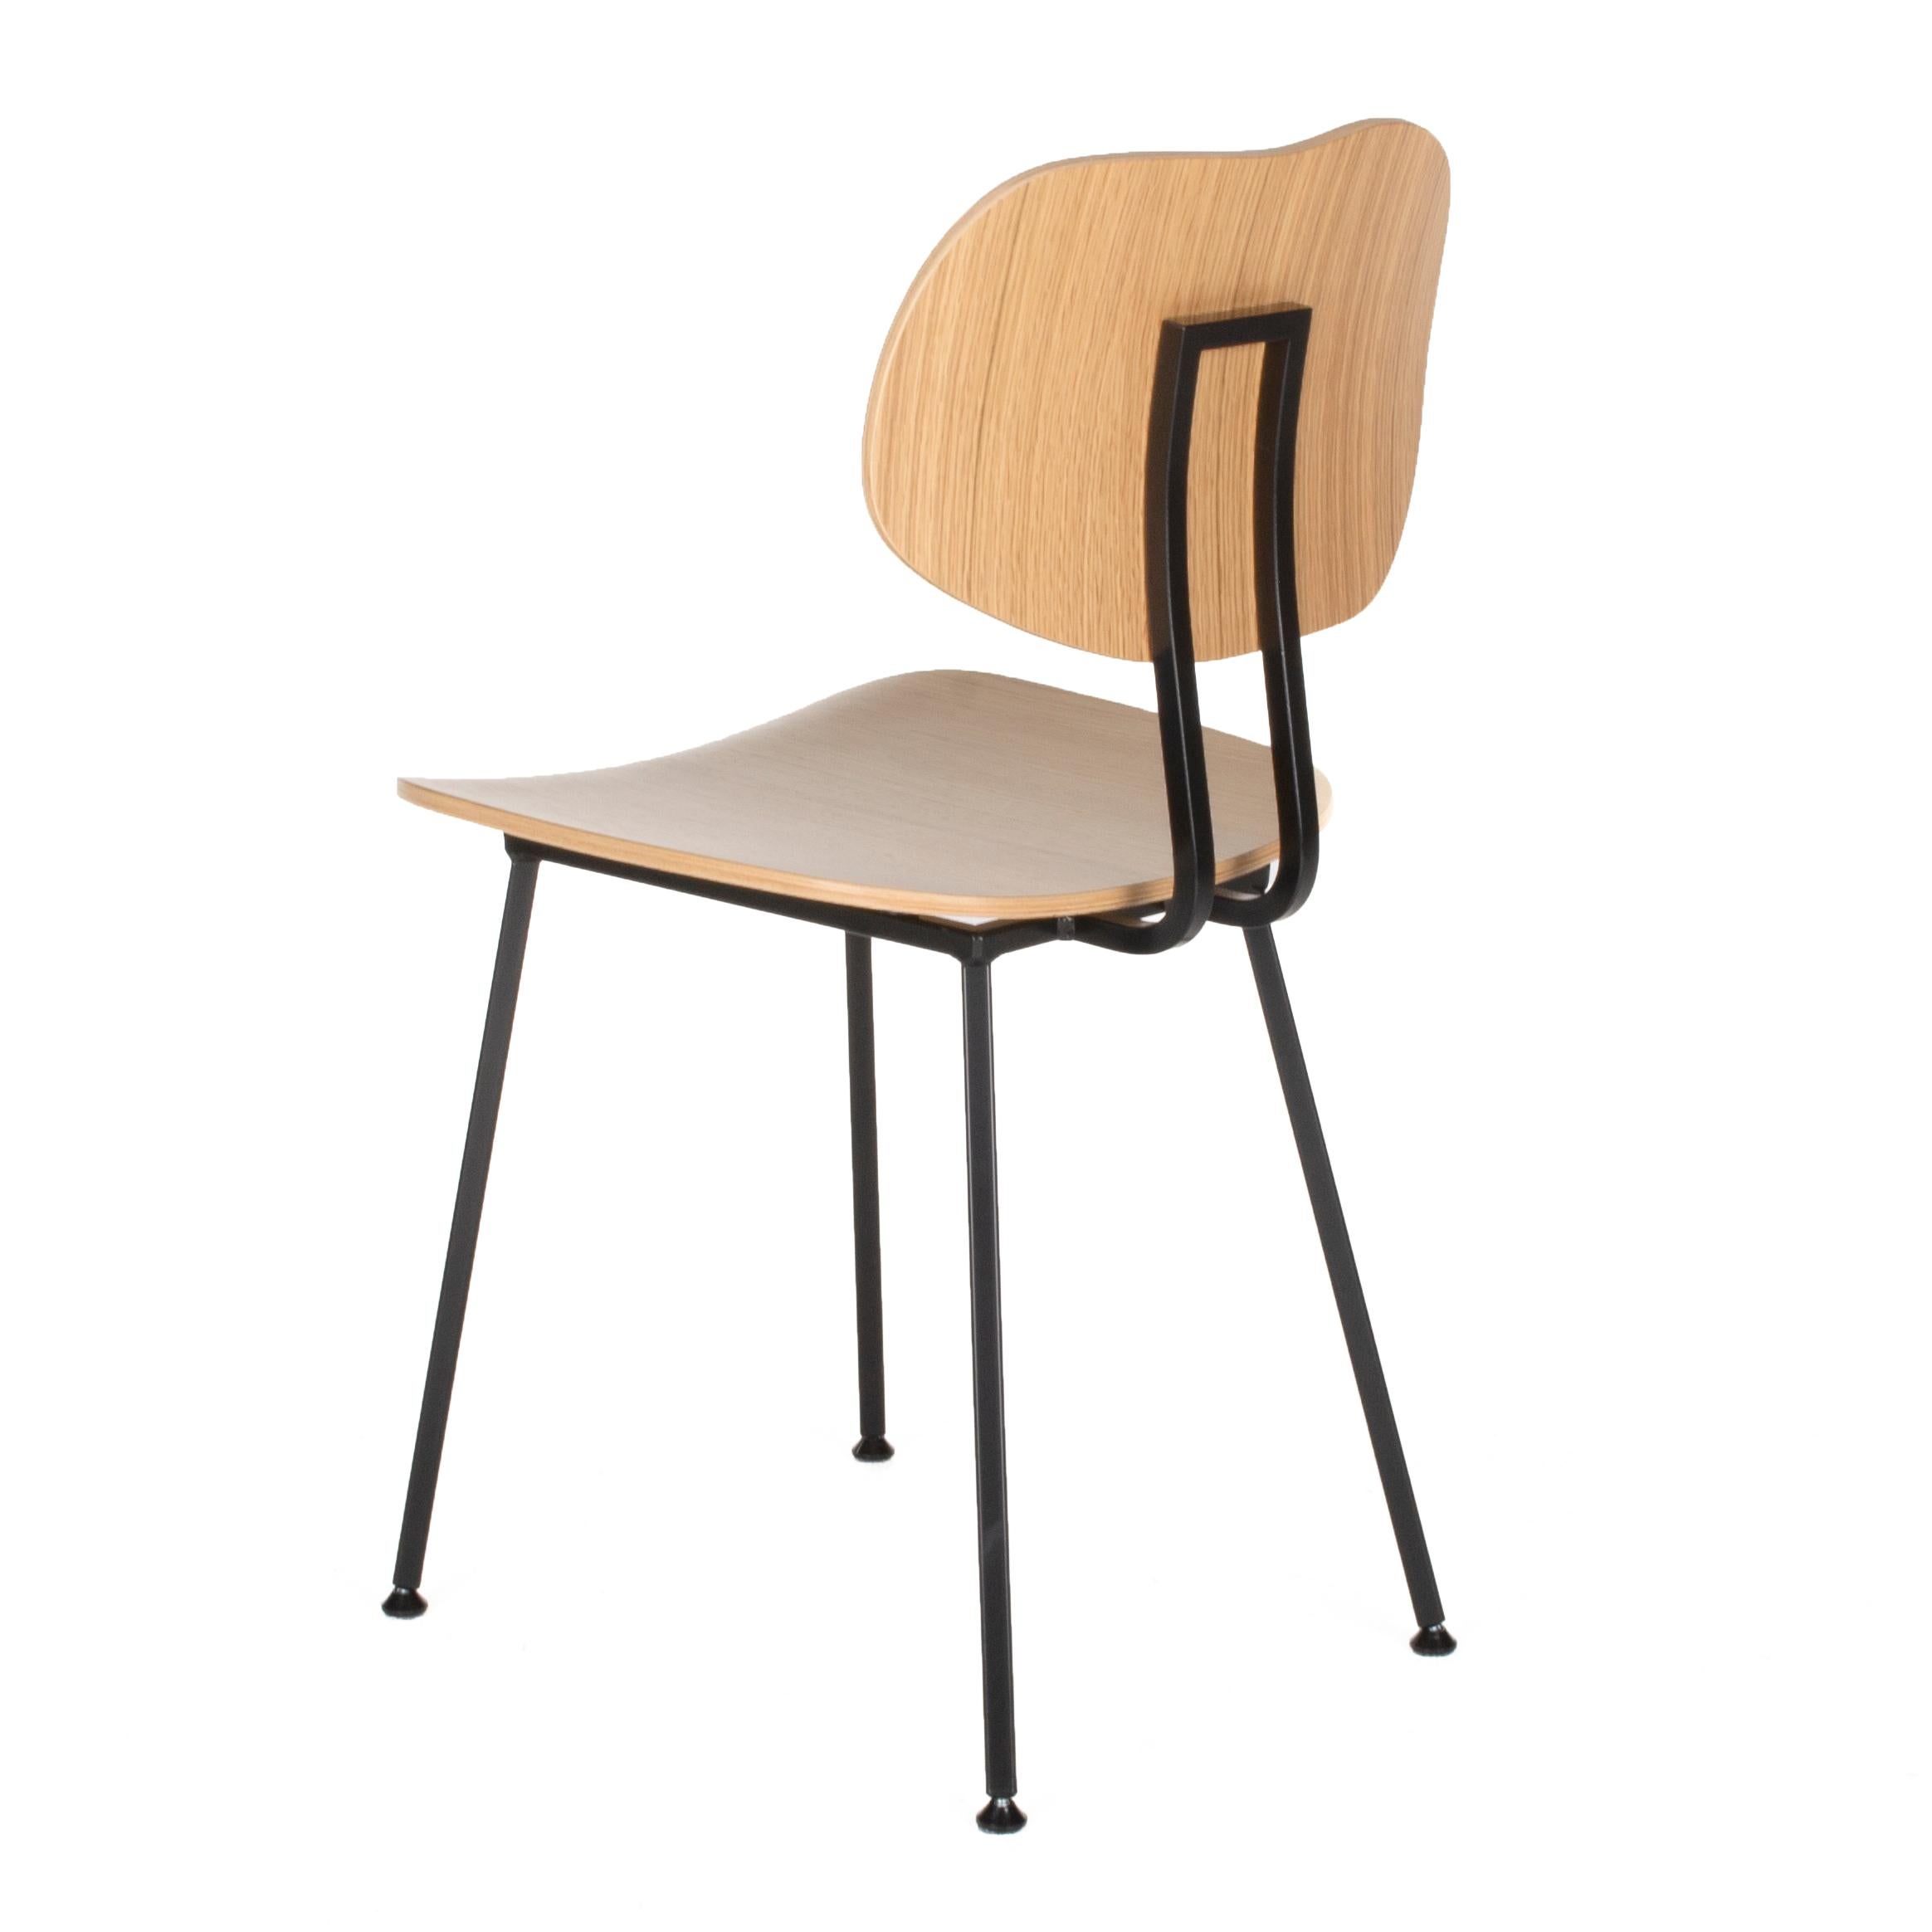 101 chair wooden

The 101 chair designed by Maarten Baas for Lensvelt. This type of chair is ideal for any modern interior bringing a touch of nature back into the desired space. The simplicity of the sleek lines and smoothness will allow this